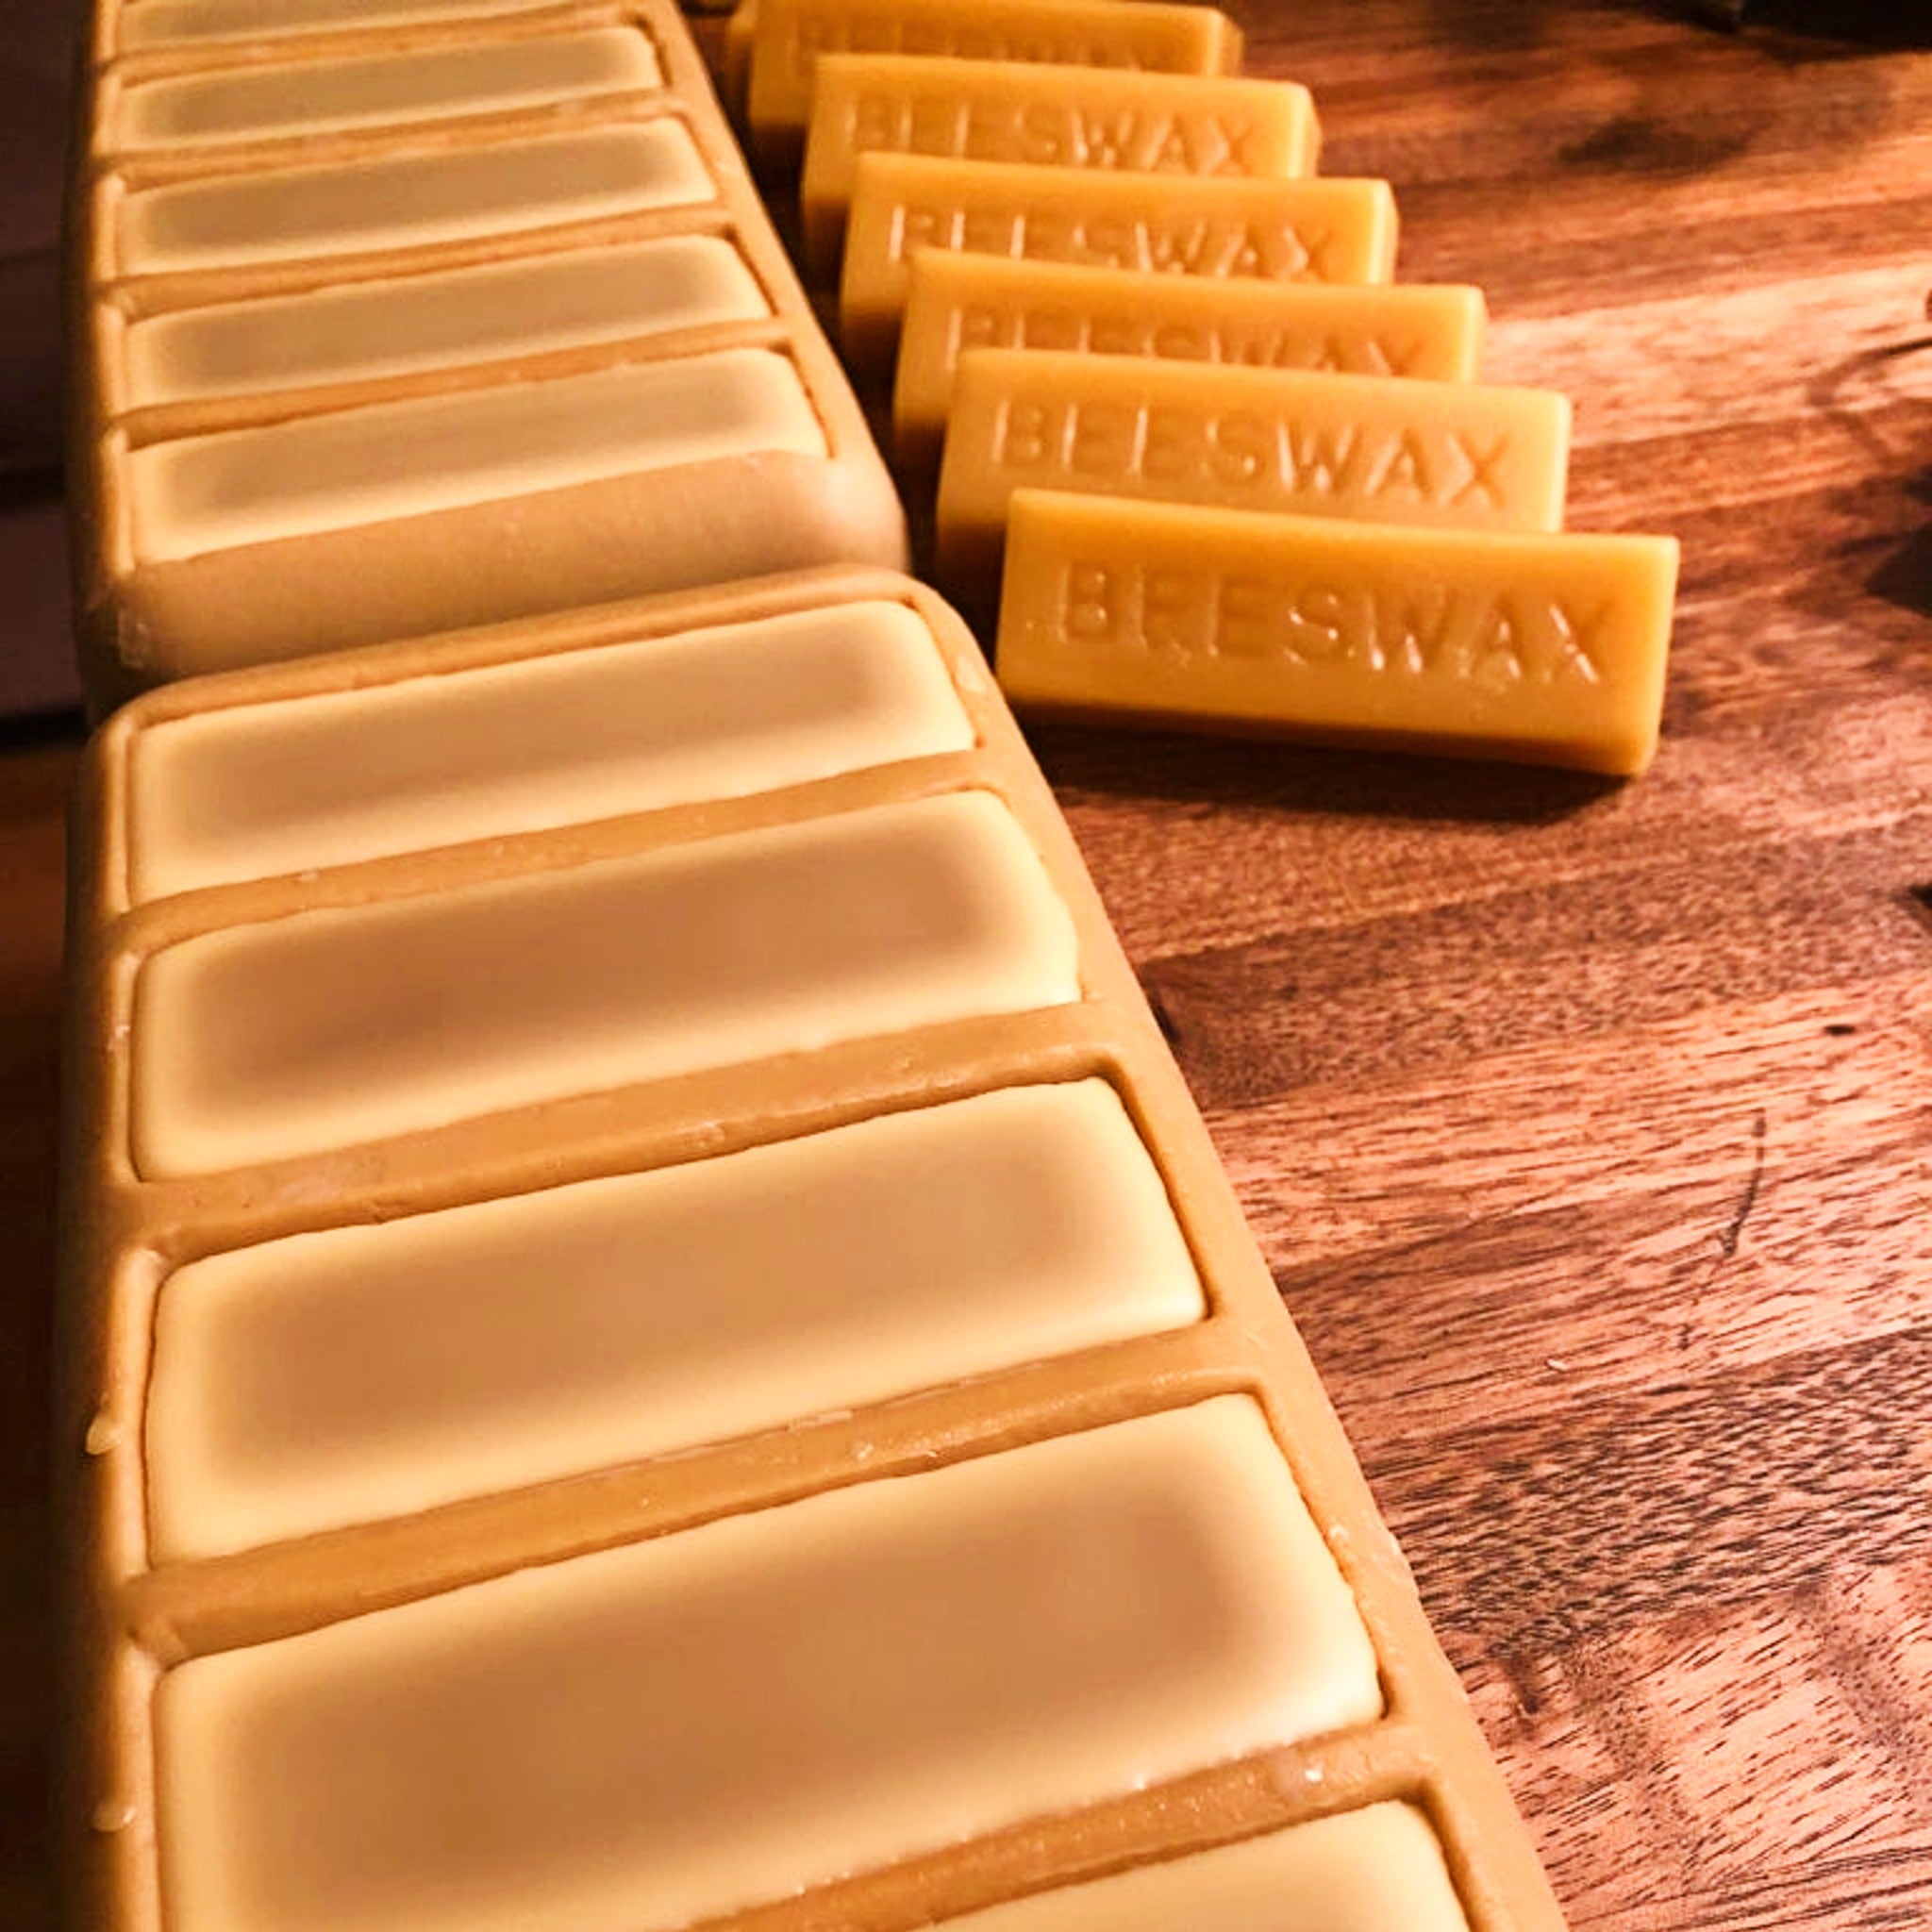 1 oz. beeswax blocks being formed by Mill Creek Apiary